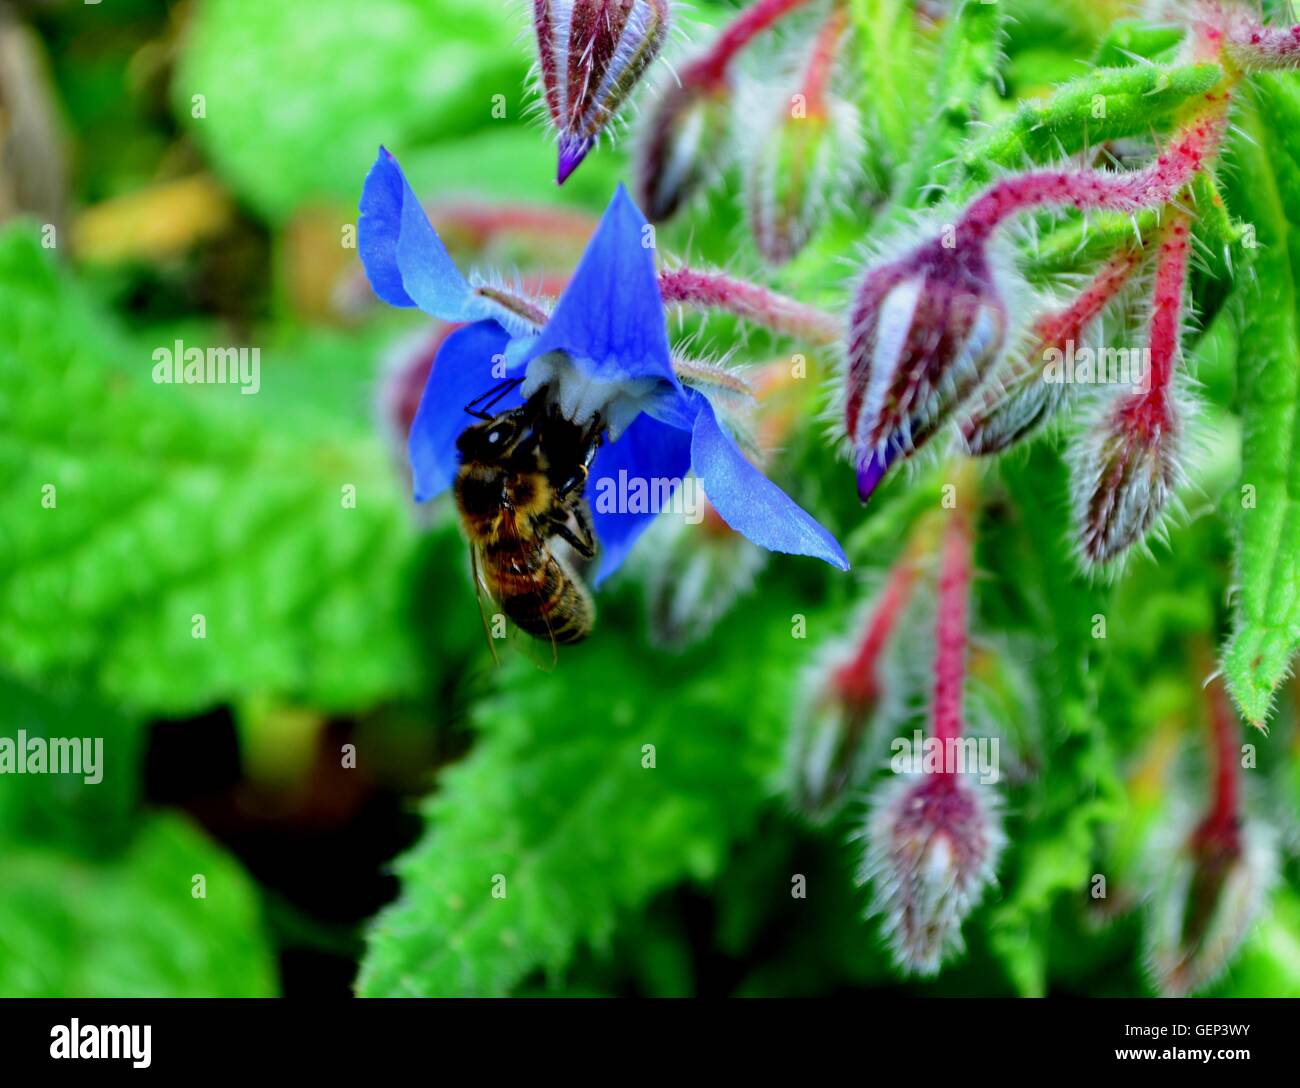 A wasp feeds on nectar from a borage flower surrounded by borage buds and foliage Stock Photo